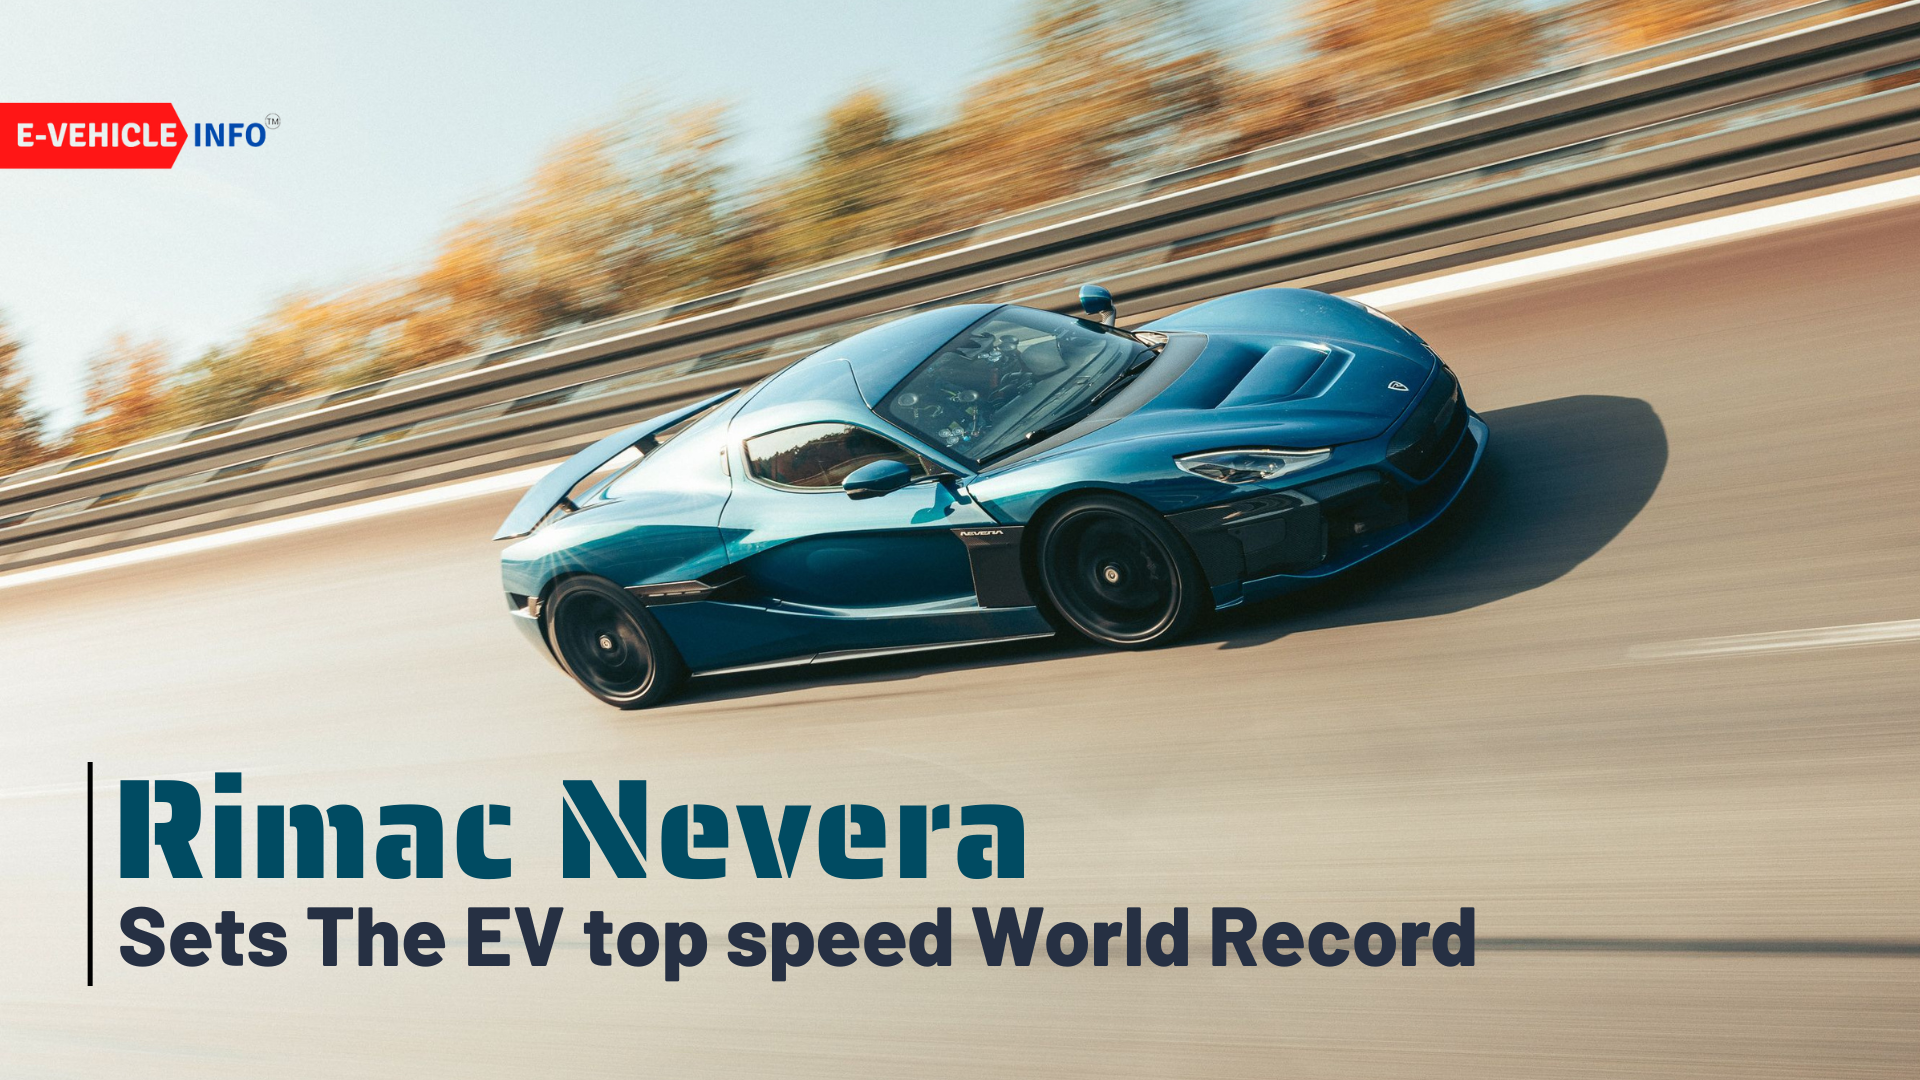 https://e-vehicleinfo.com/global/rimac-nevera-set-world-record-for-fastest-electric-car-in-world/